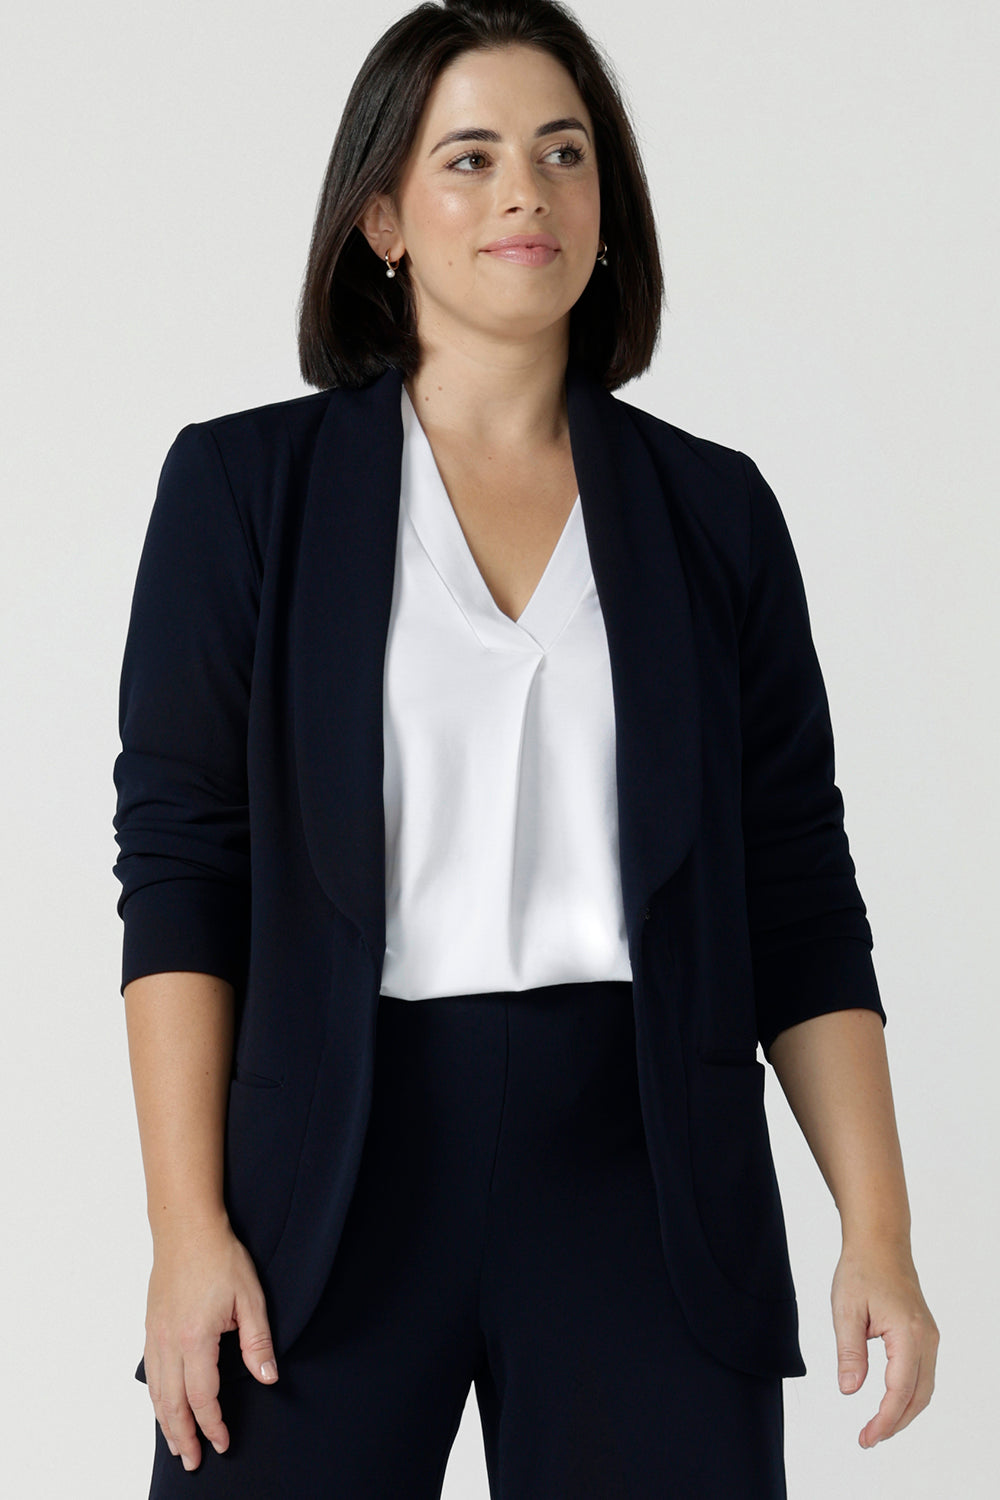 Size 10 women wearing a Navy Marit blazer with Scuba crepe and collar. It has functional patch pockets and tailored shawl collar. Stylish corporate casual wear for women. Made in Australia size 8 - 24. 